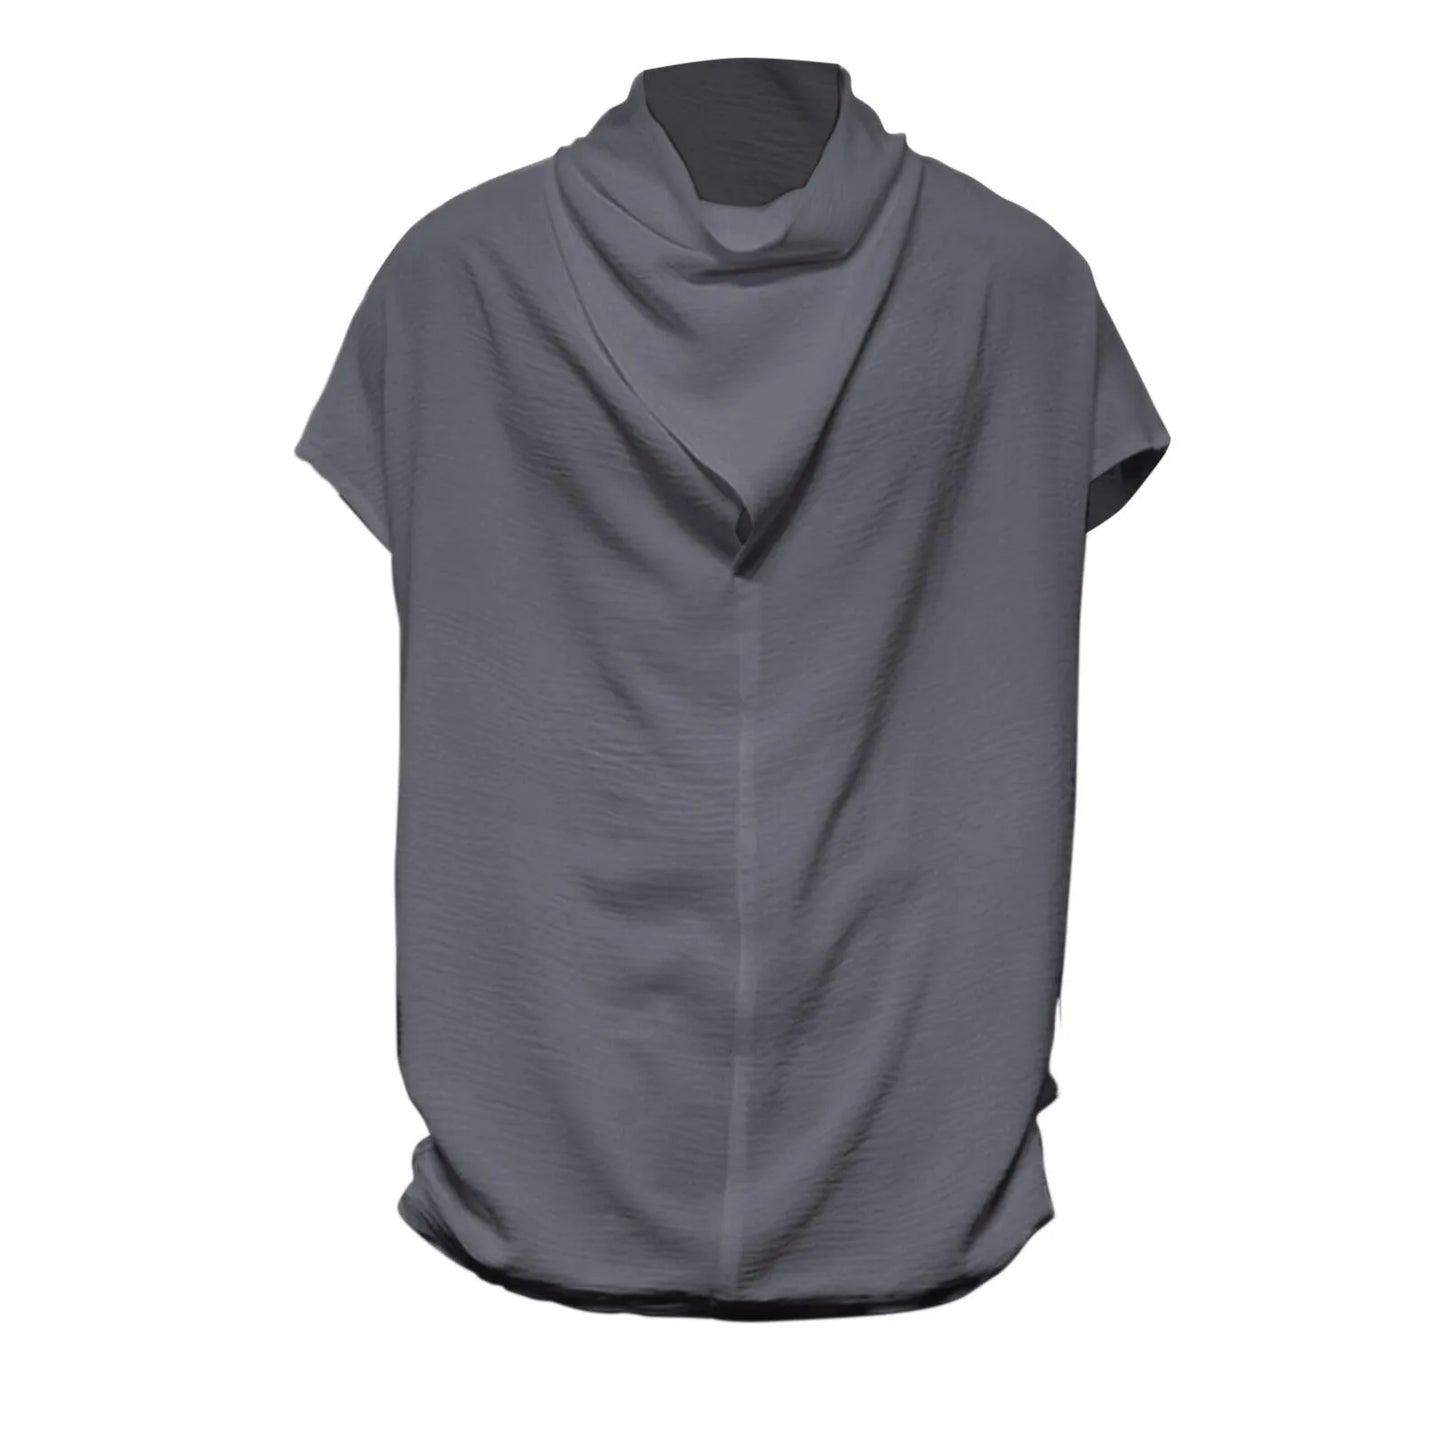 Men's  Silk Stacked Collar Sleeveless Undershirt Men's Sleeveless T Shirt/Men's Loose 3xlt Shirts for Men Big And Tall